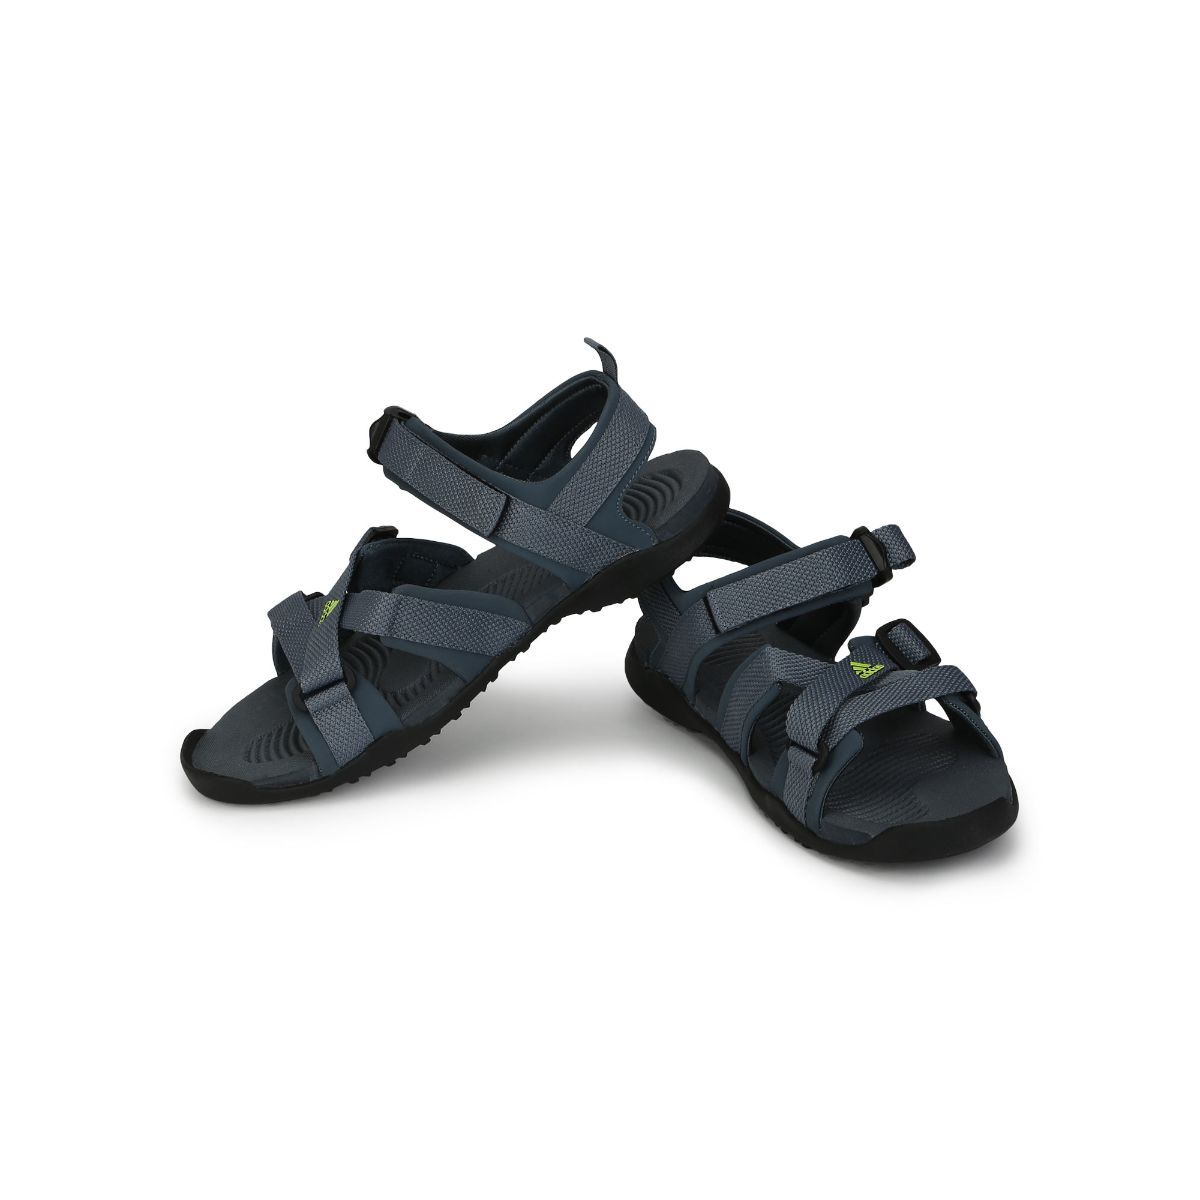 Buy Navy Blue Sandals for Men by ADIDAS Online | Ajio.com